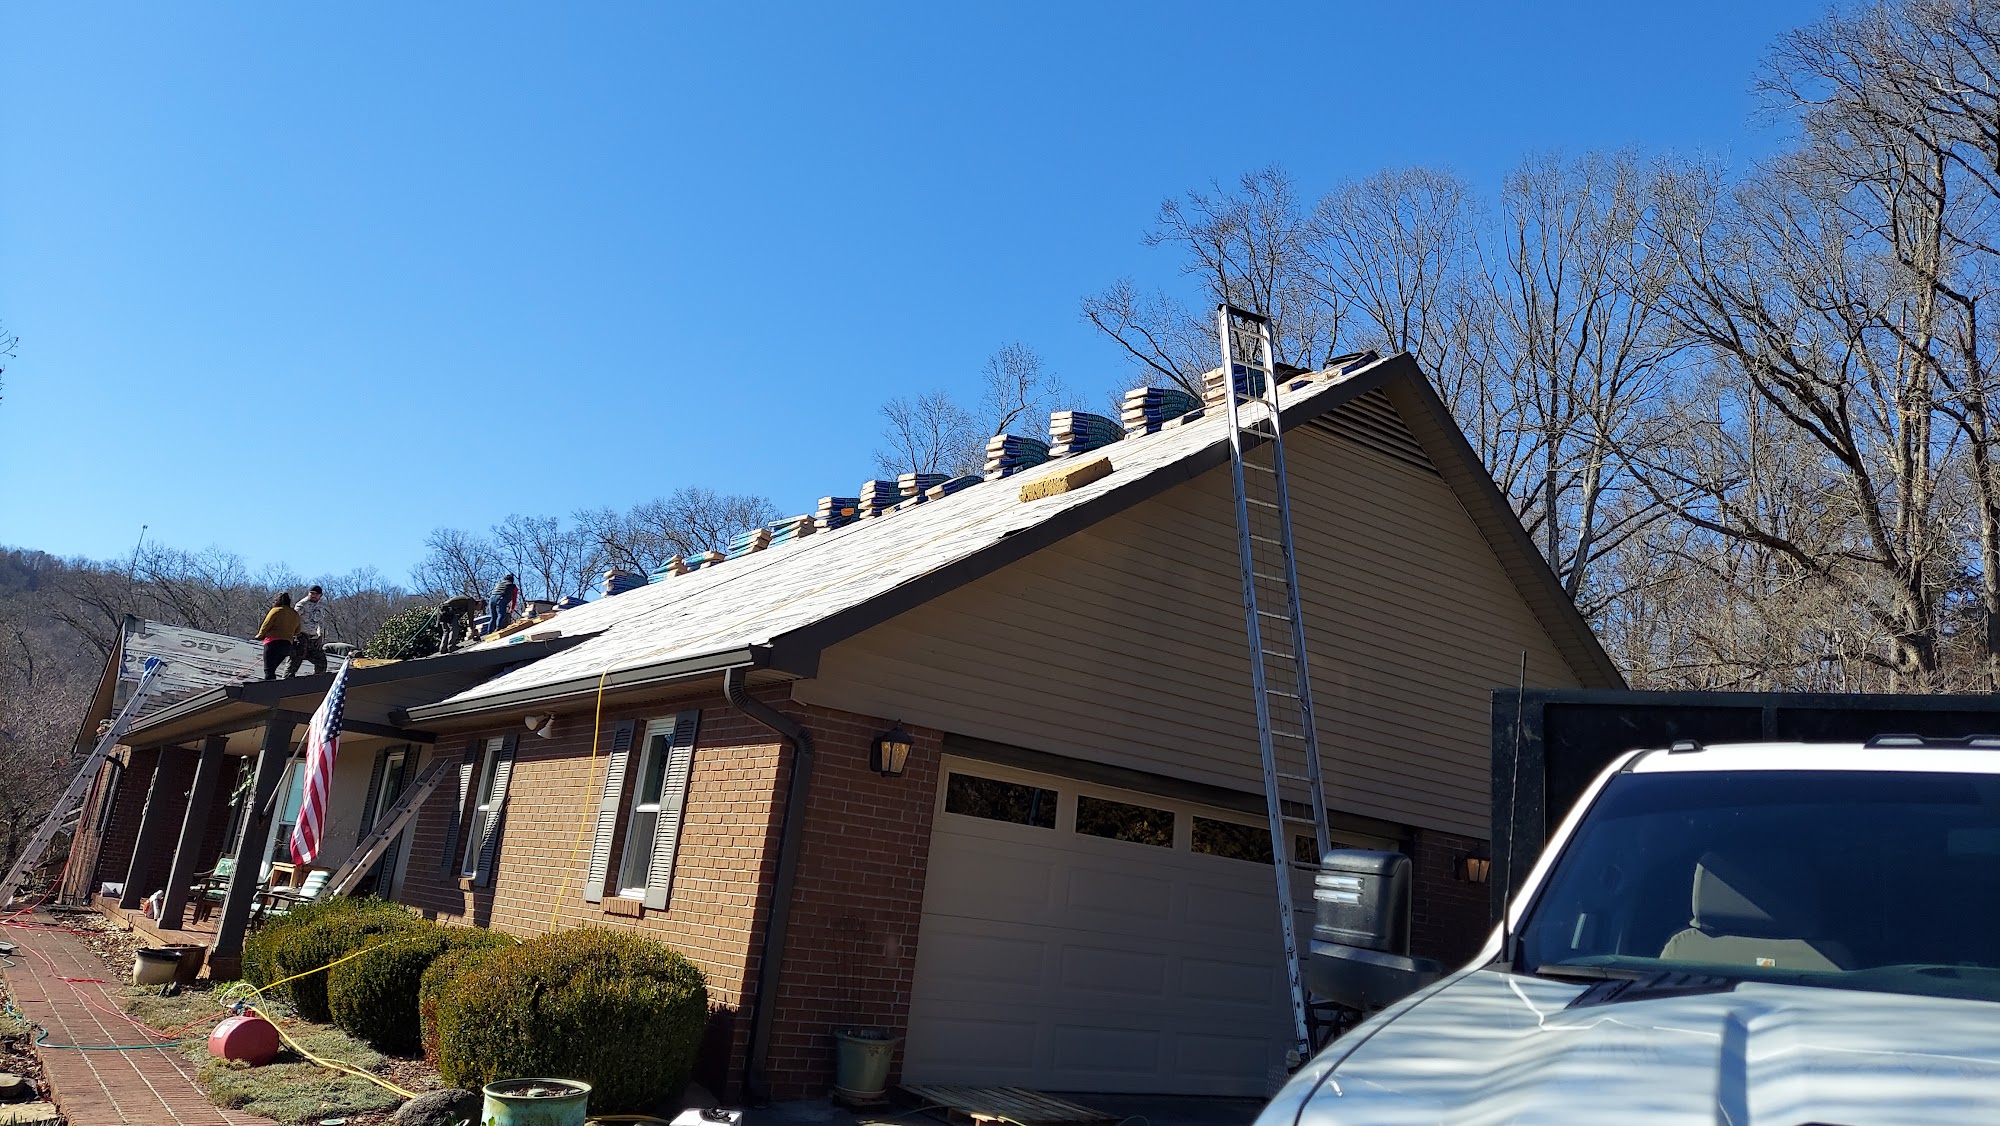 Martin's Roofing Service